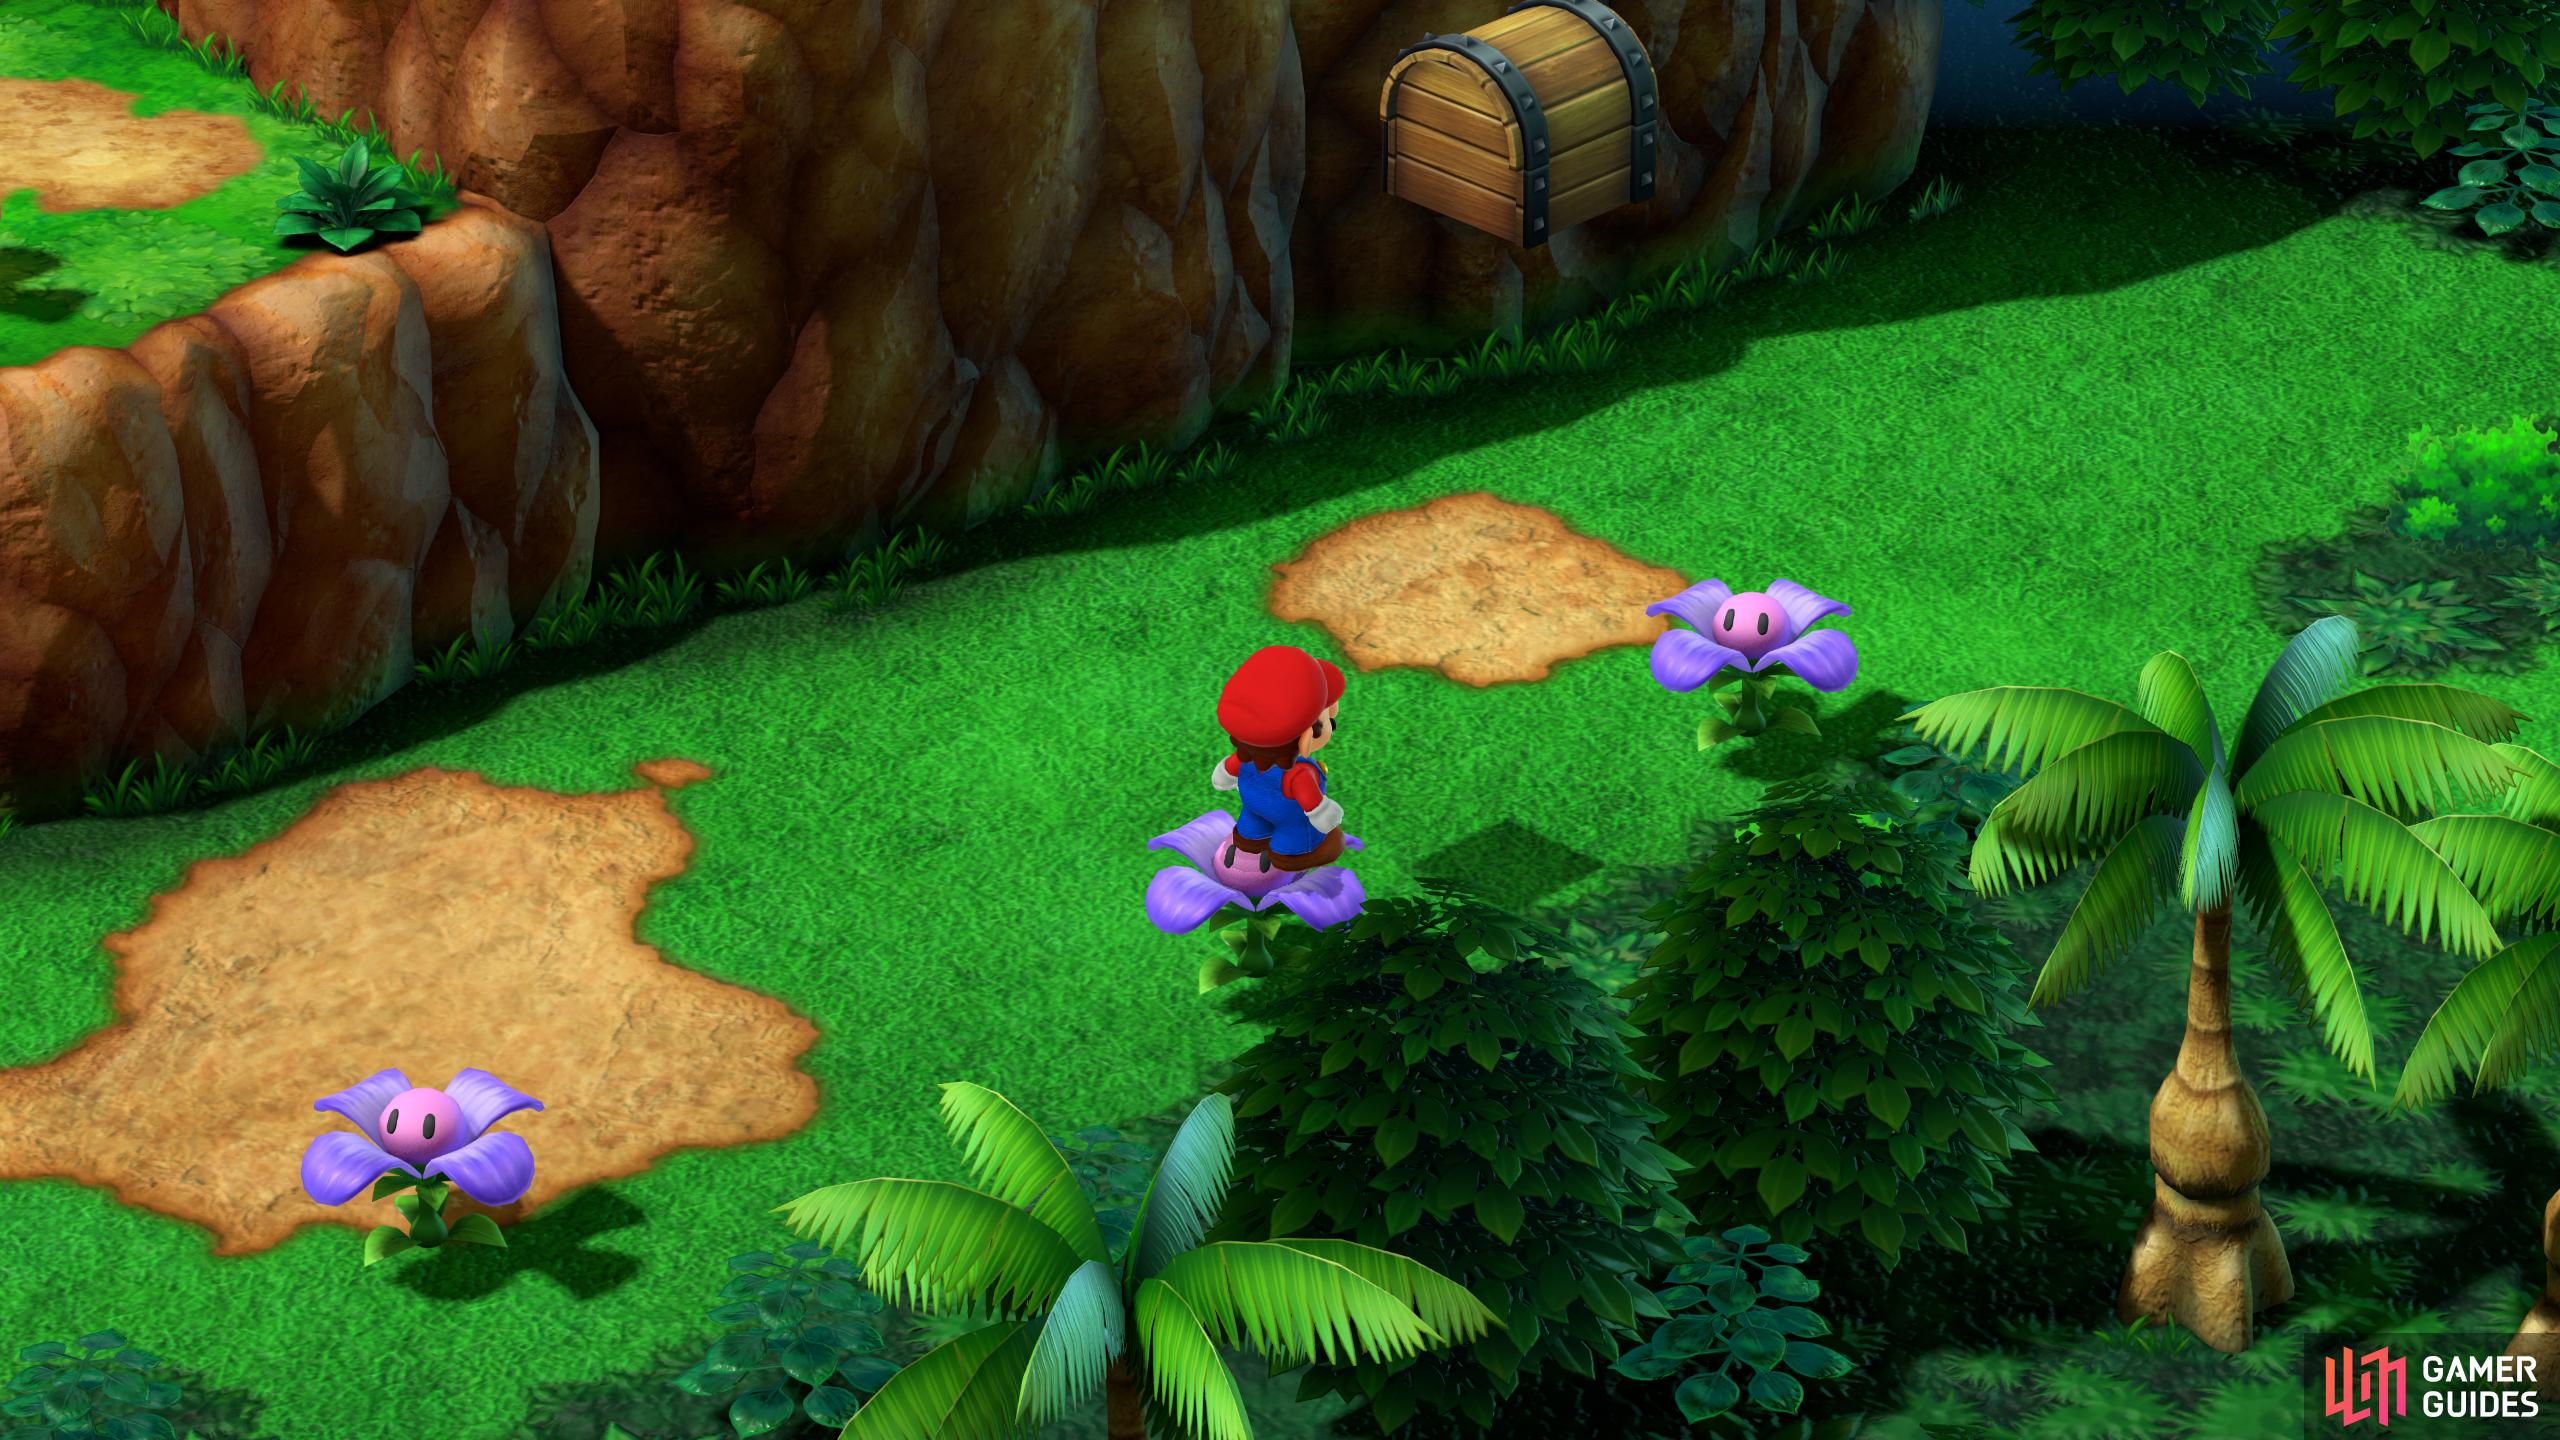 Hidden Treasure 3: In the grassy area, head east, and jump on the second purple flower. From there, jump across to the third purple flower to get the chest.